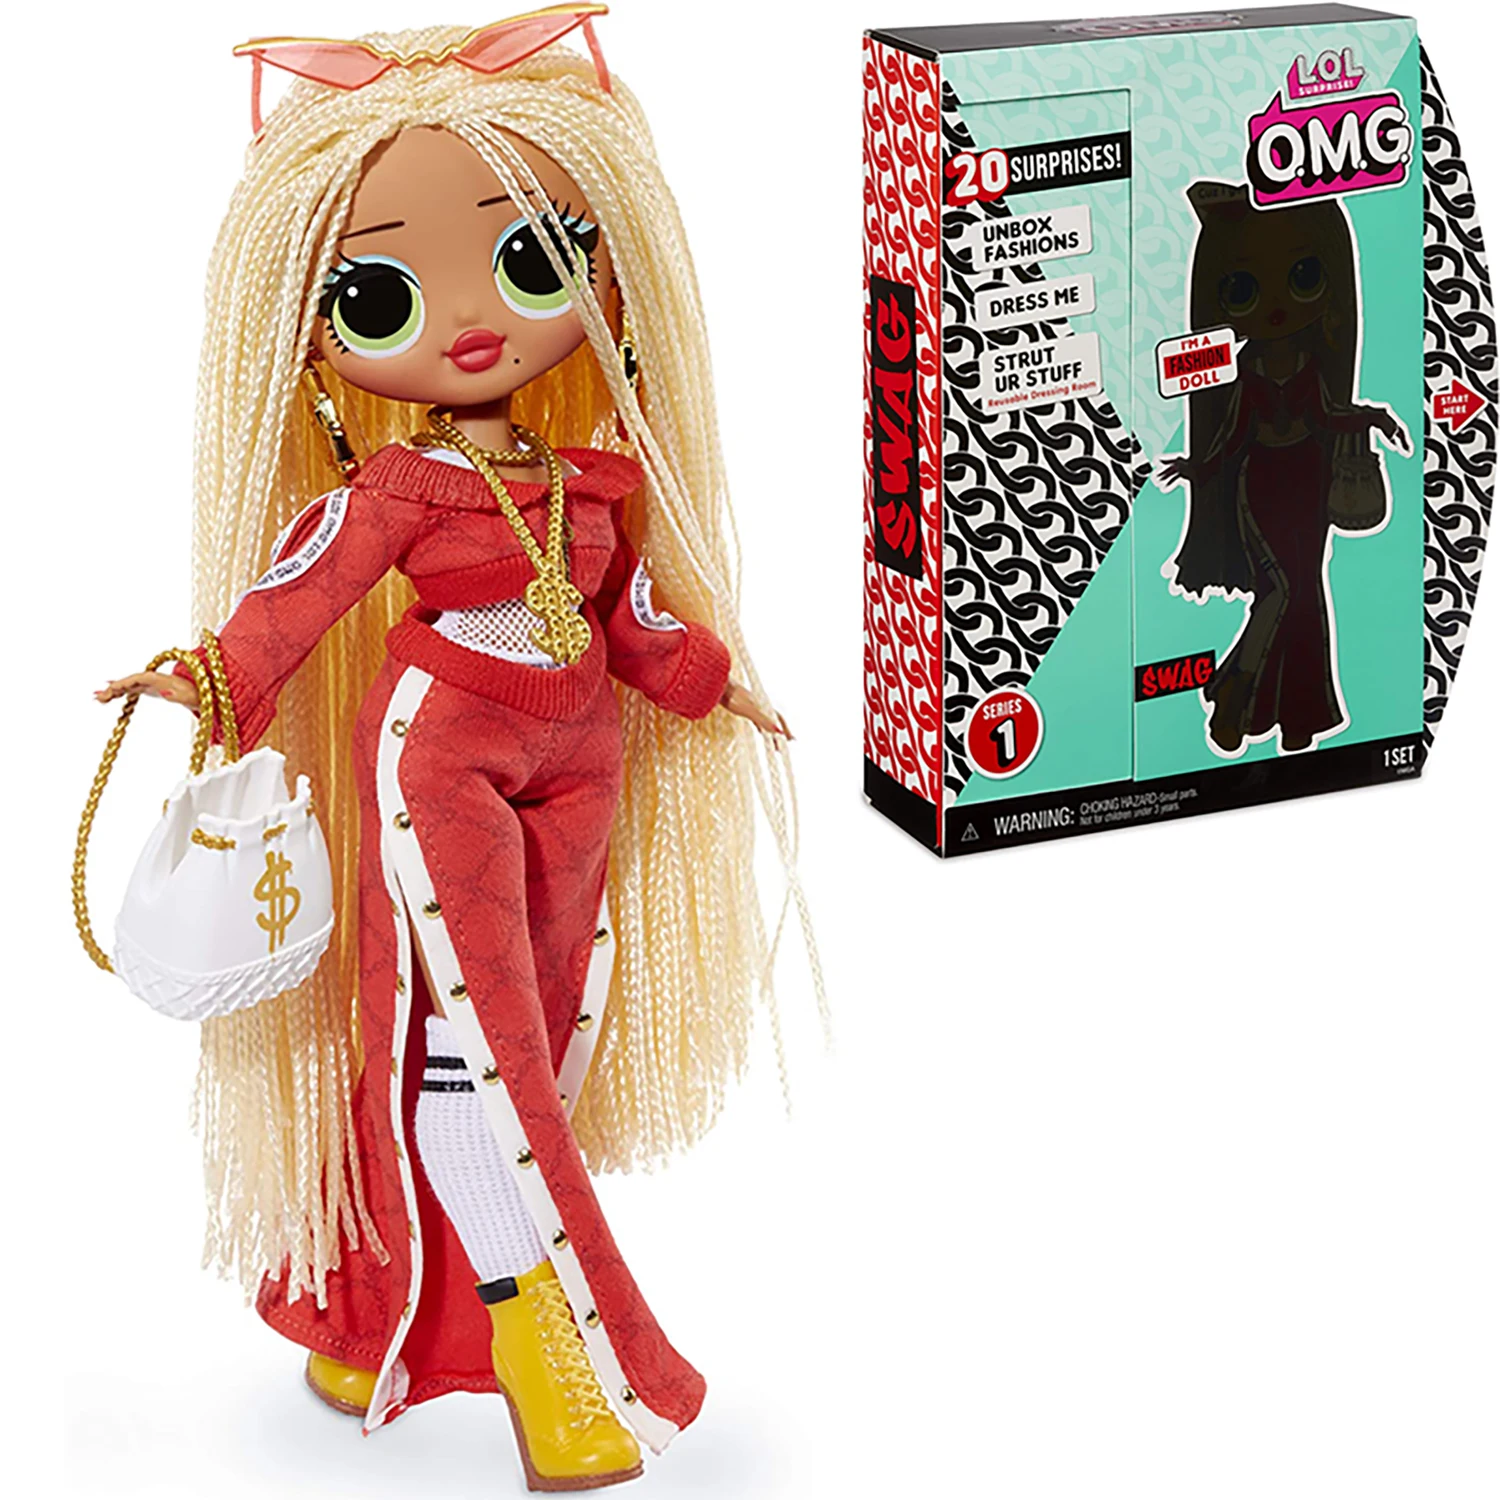 

New L.O.L. Surprise! O.M.G. Swag Fashion Doll Cute Blind Box Limited Collection Toy Lol Surprises Dolls Kids Toys Gift